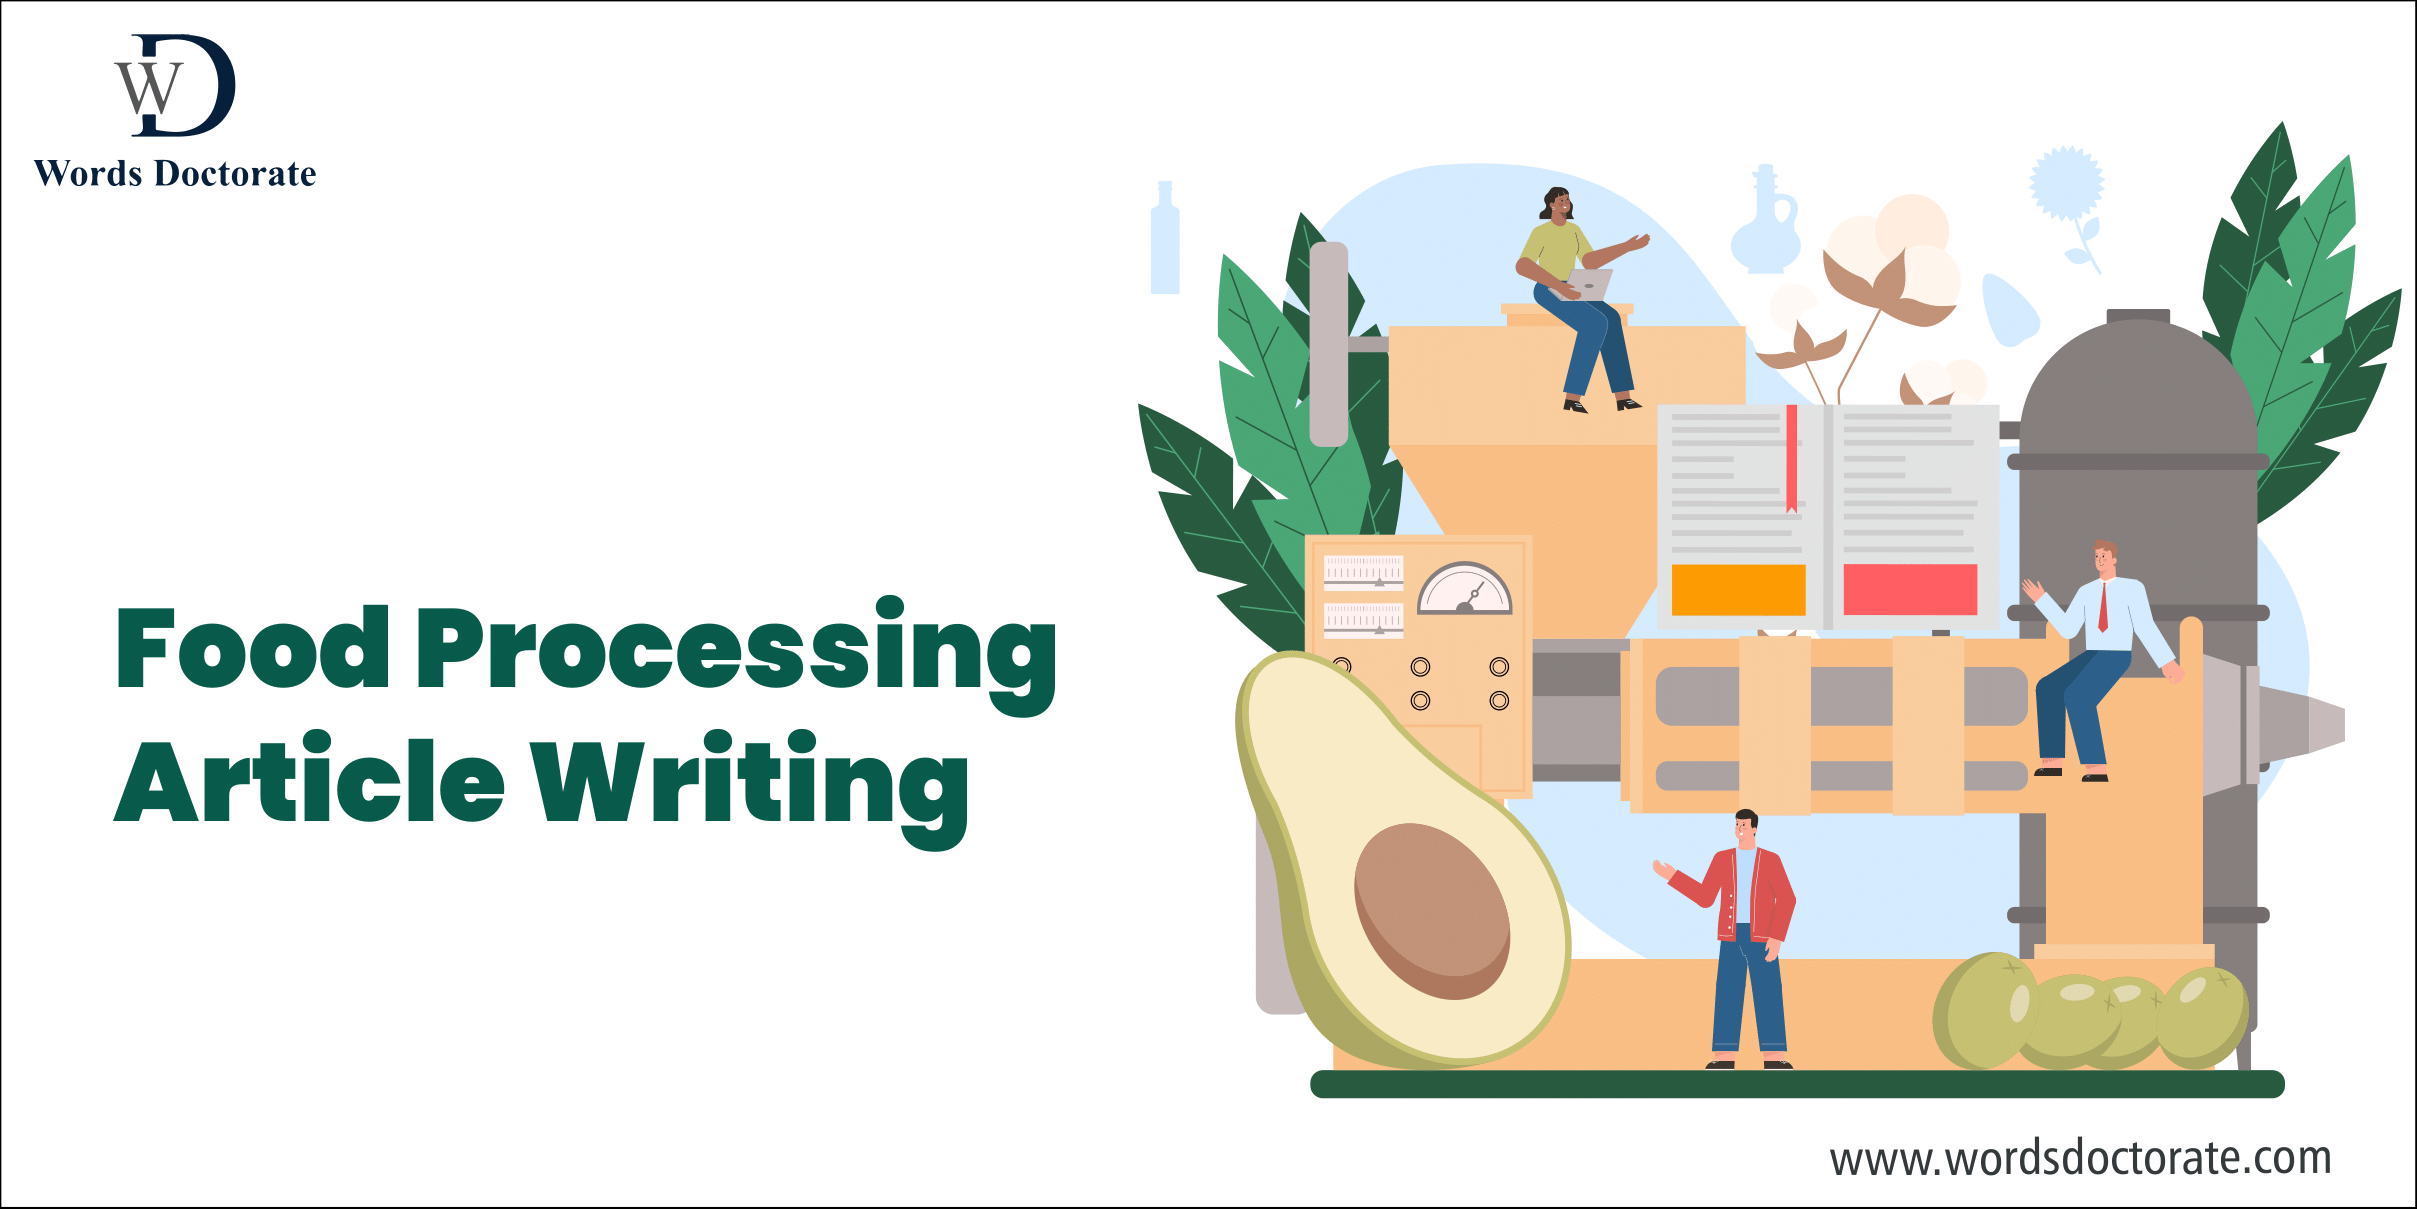 Food Processing Article Writing